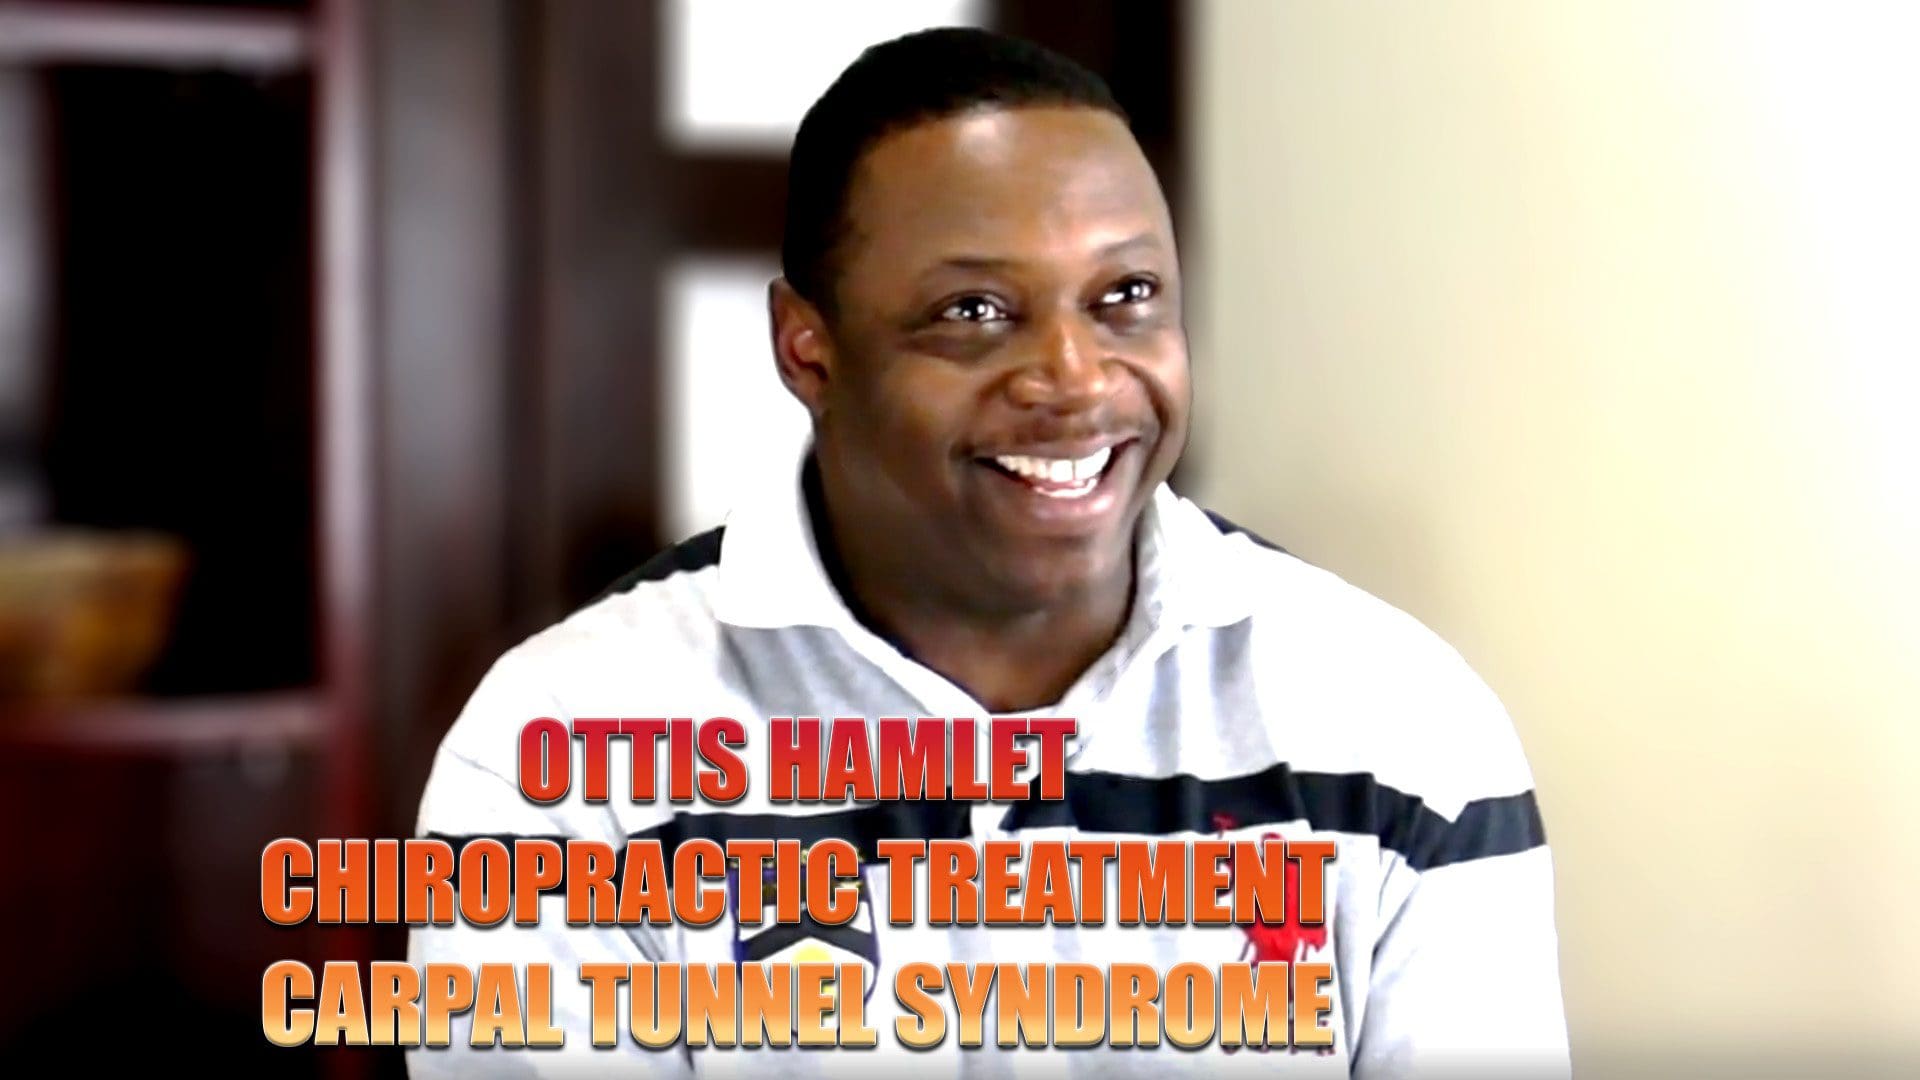 chiropractic treatment carpal tunnel syndrome el paso tx.